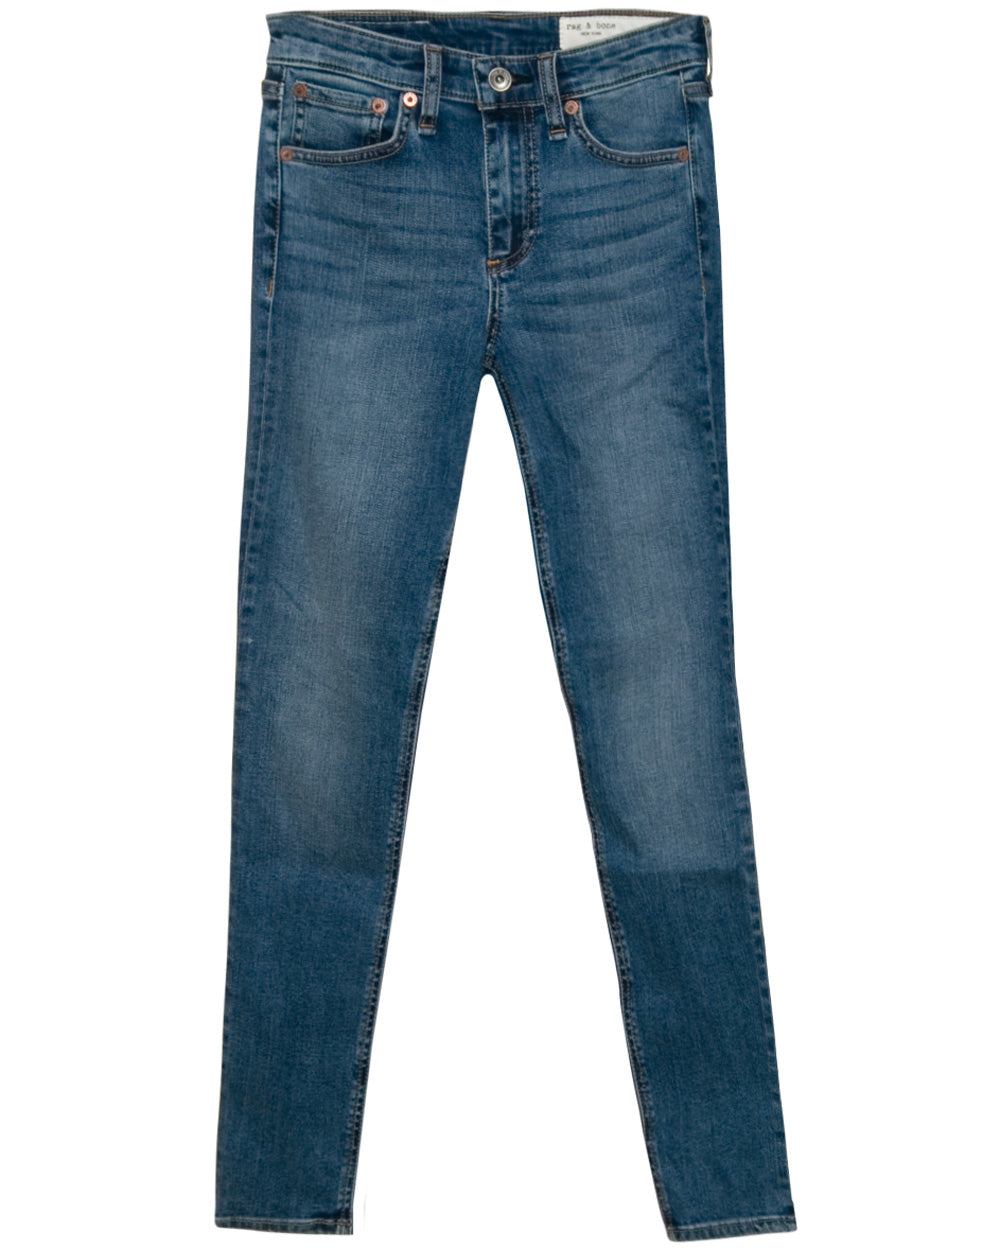 Mid Rise Cate Ankle Skinny Jean in Pismo